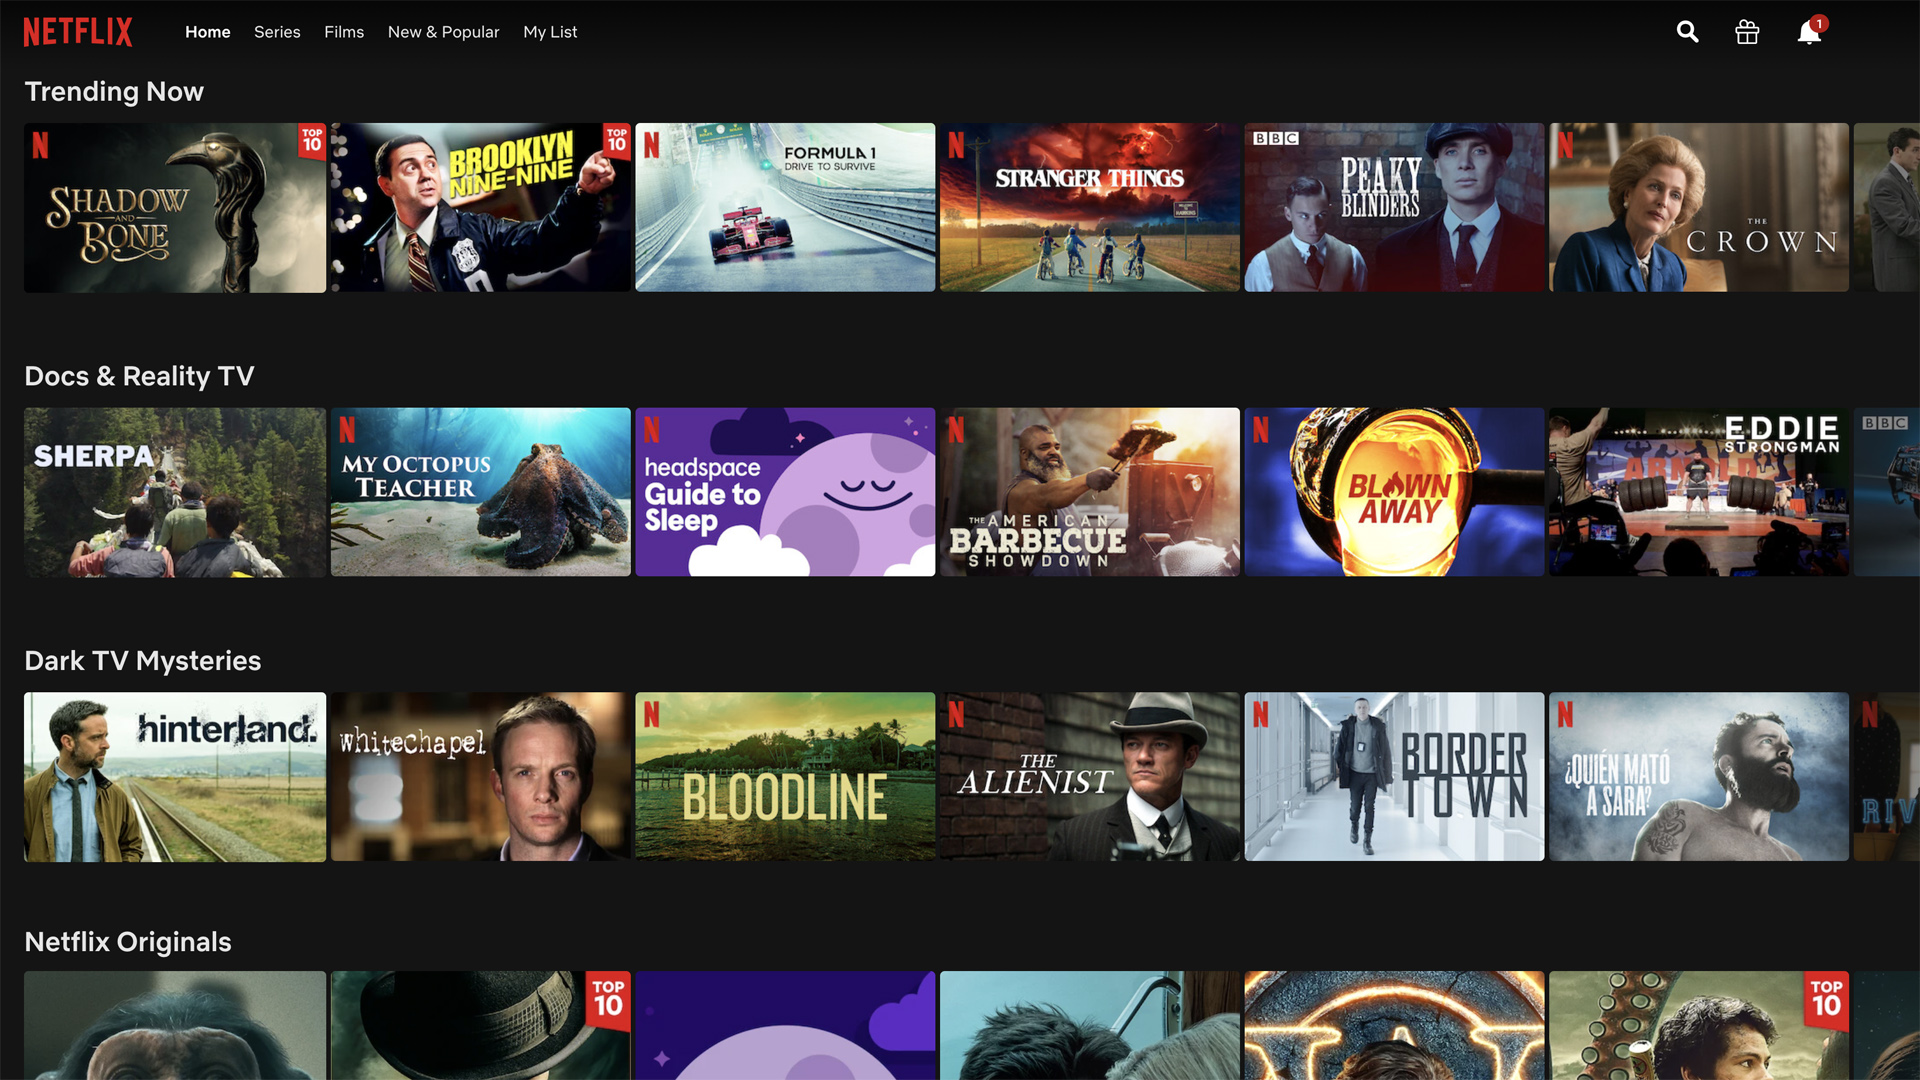 Netflix is planning to add video game streaming "within the next year